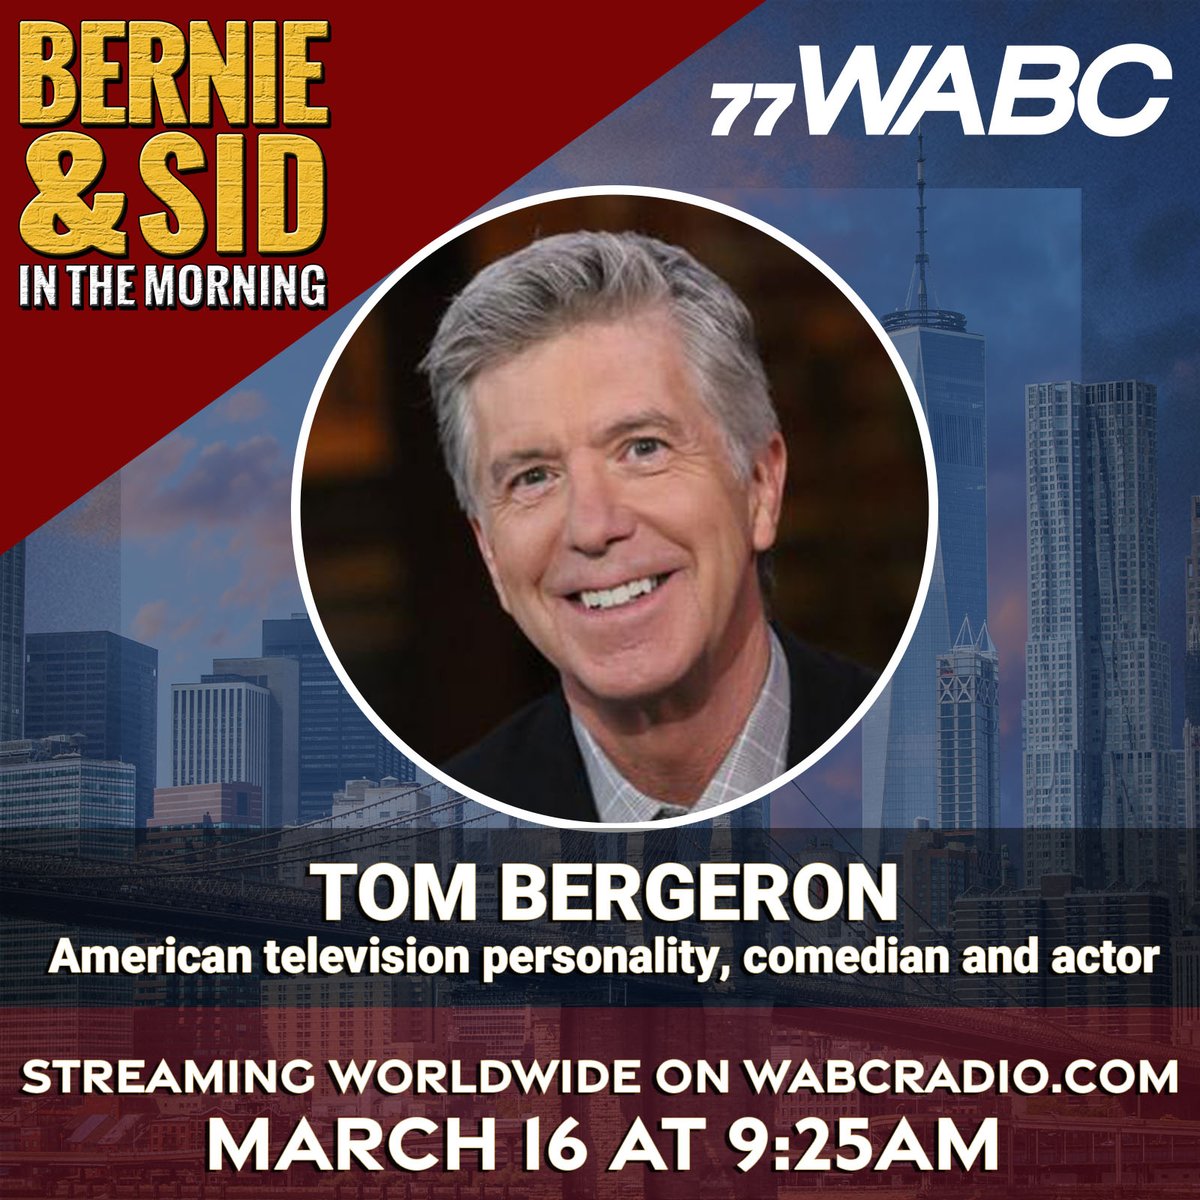 COMING UP AT 9:25AM: 

American television personality, comedian and actor @Tom_Bergeron will be on @bernieandsid! You won't want to miss this conversation! 

#trending #news #trendingnews #77wabc #tombergeron https://t.co/Aa9QDIcgbL